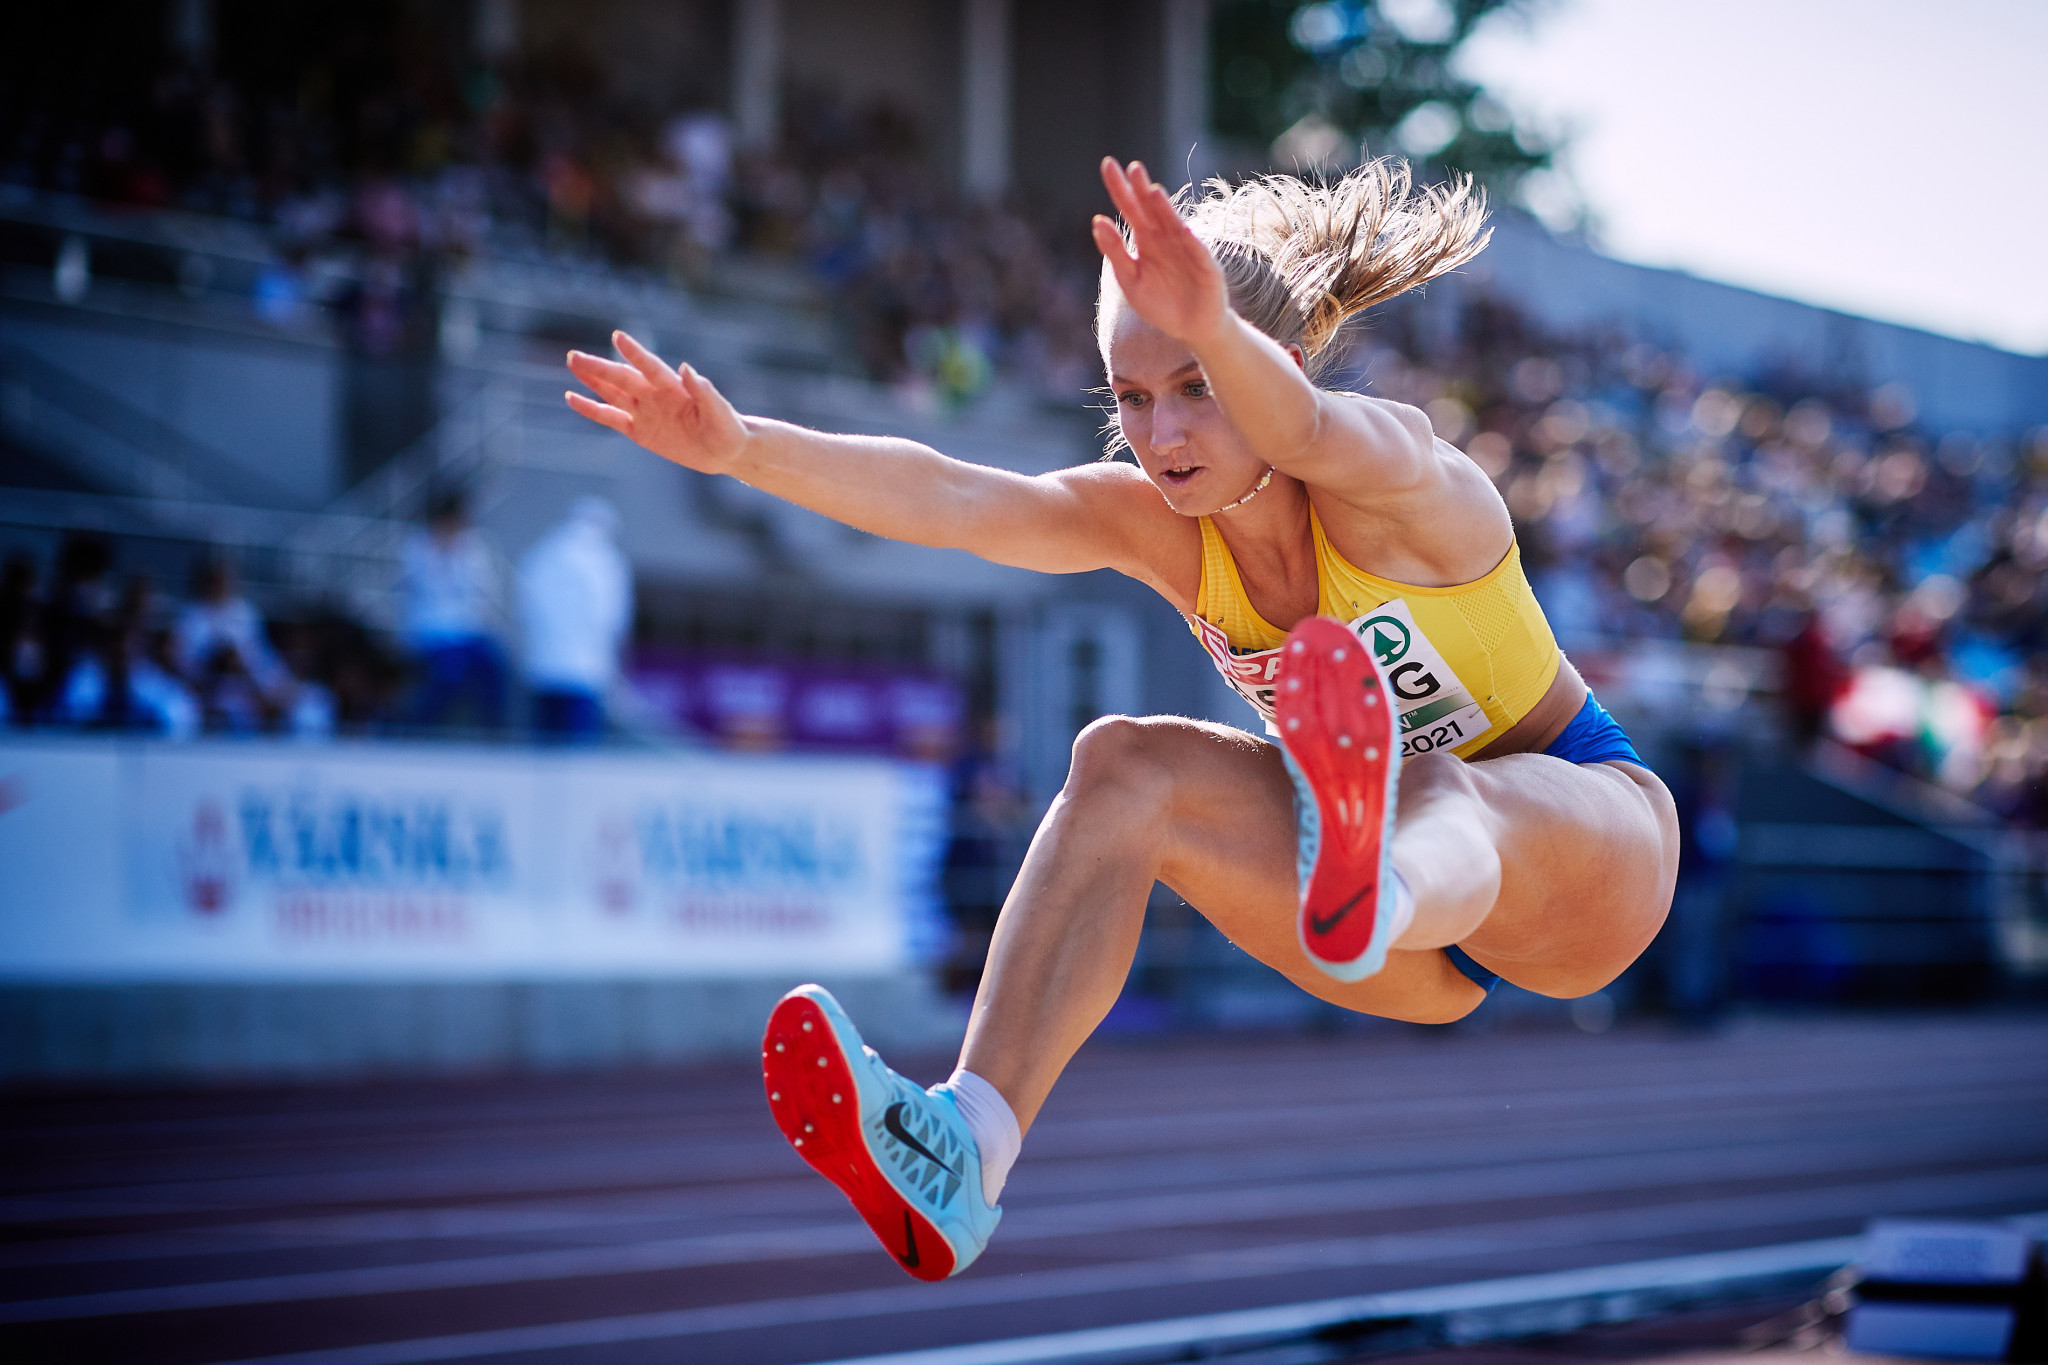 Under-20 long jump and triple jump world champion Maja Åskag is among the athletes enrolled in the scheme ©Getty Images